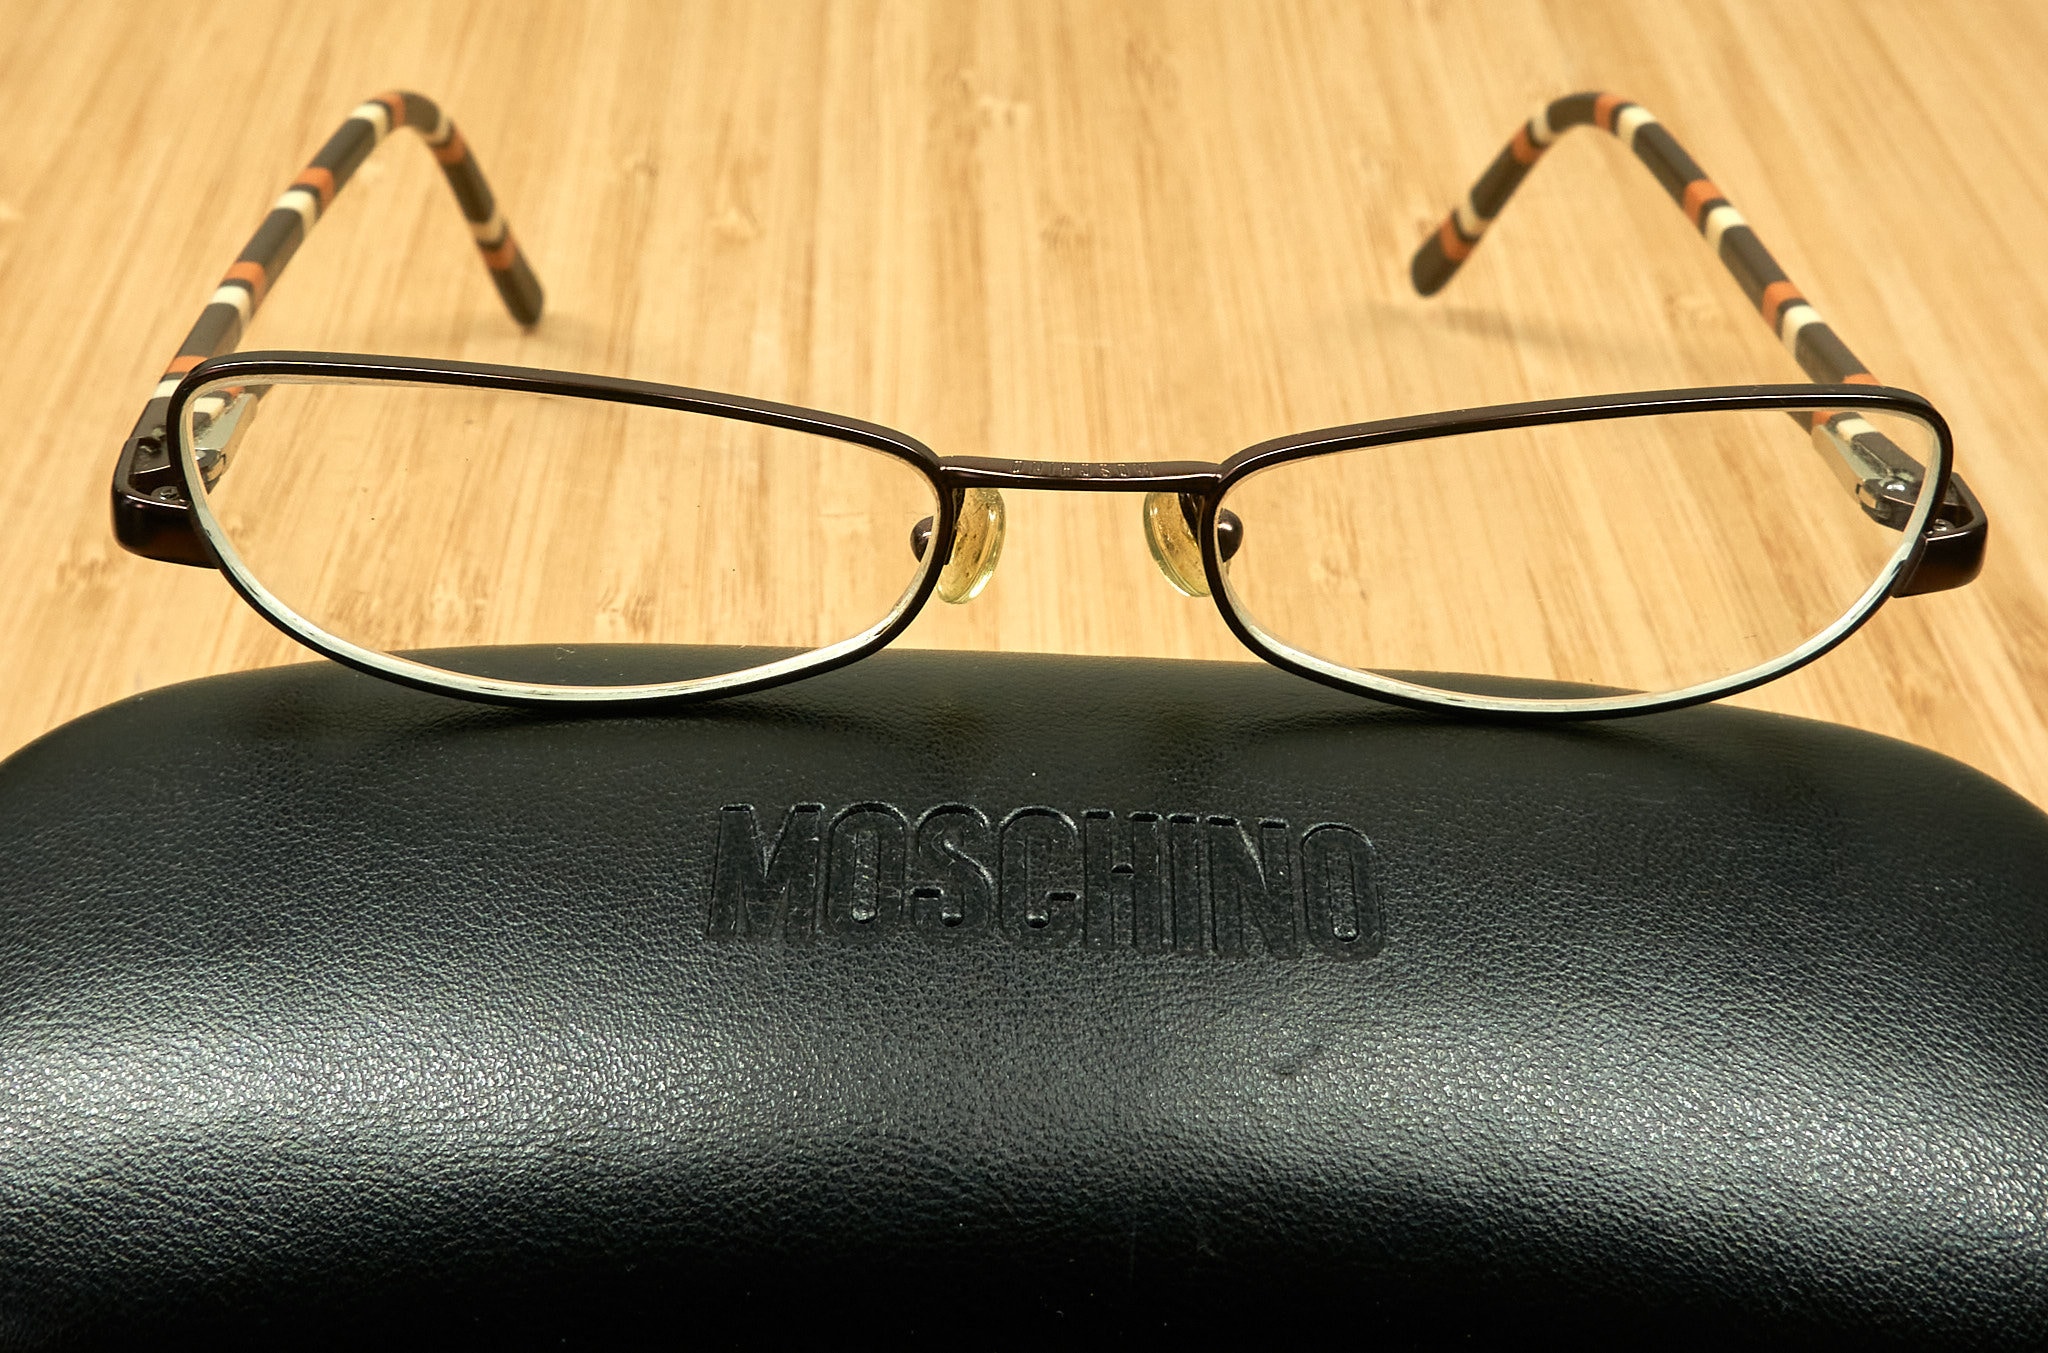 All this time, I didn't know these Moschino photo frames are